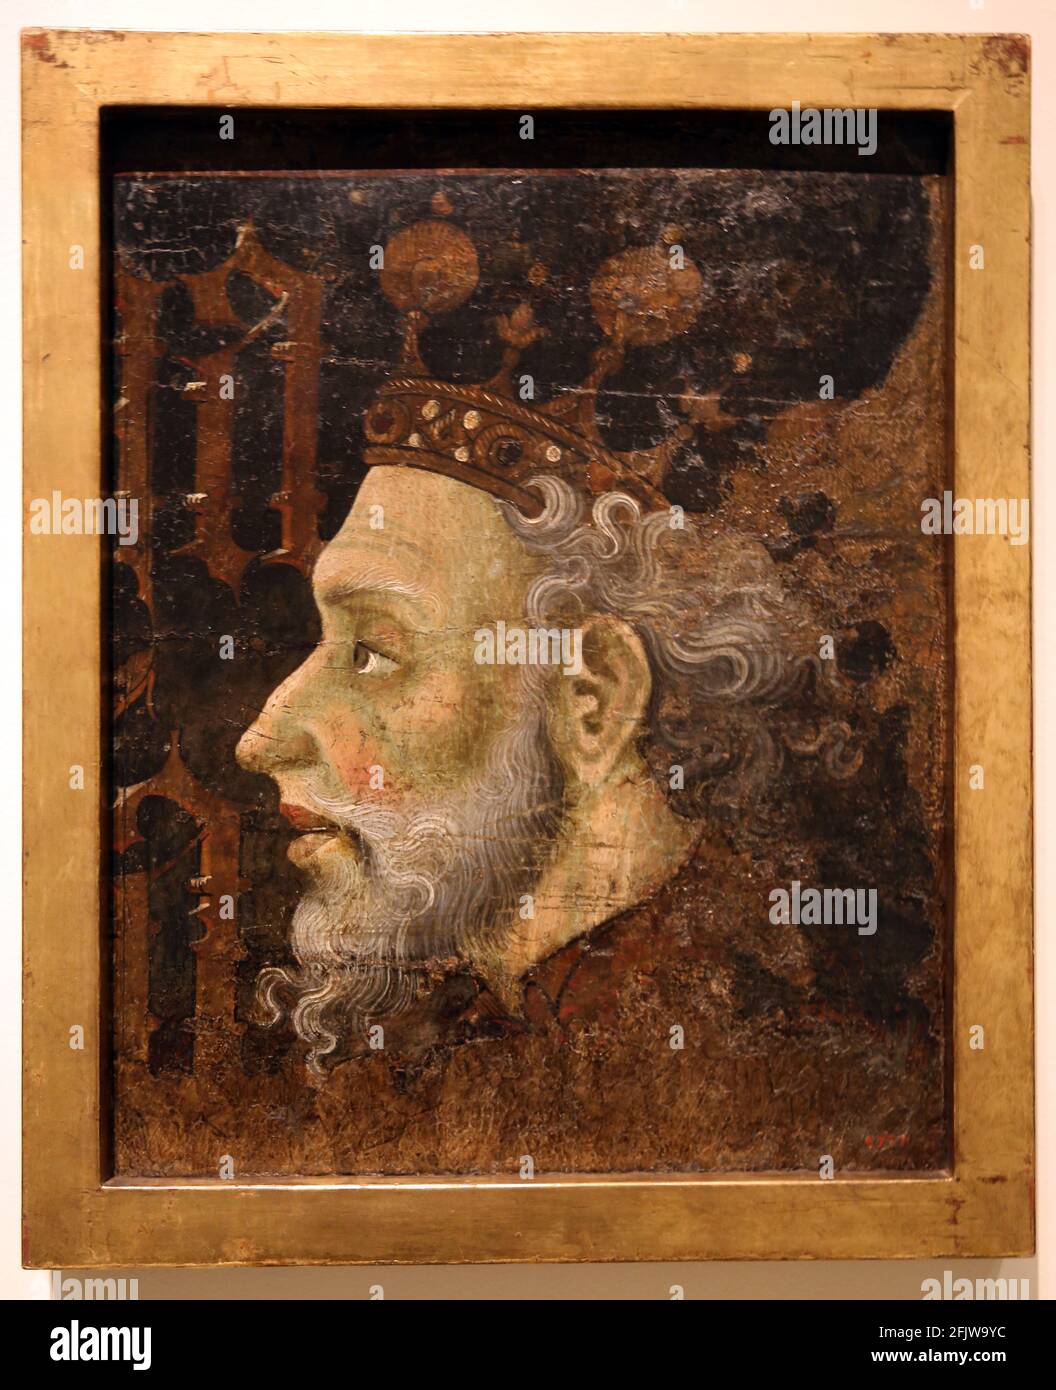 Alfonso V (1396-1458). King of Aragon. Portrait by Jaume Mateu  1402- 52). National Art Museum of Catalonia. Barcelona,  Spain. Stock Photo